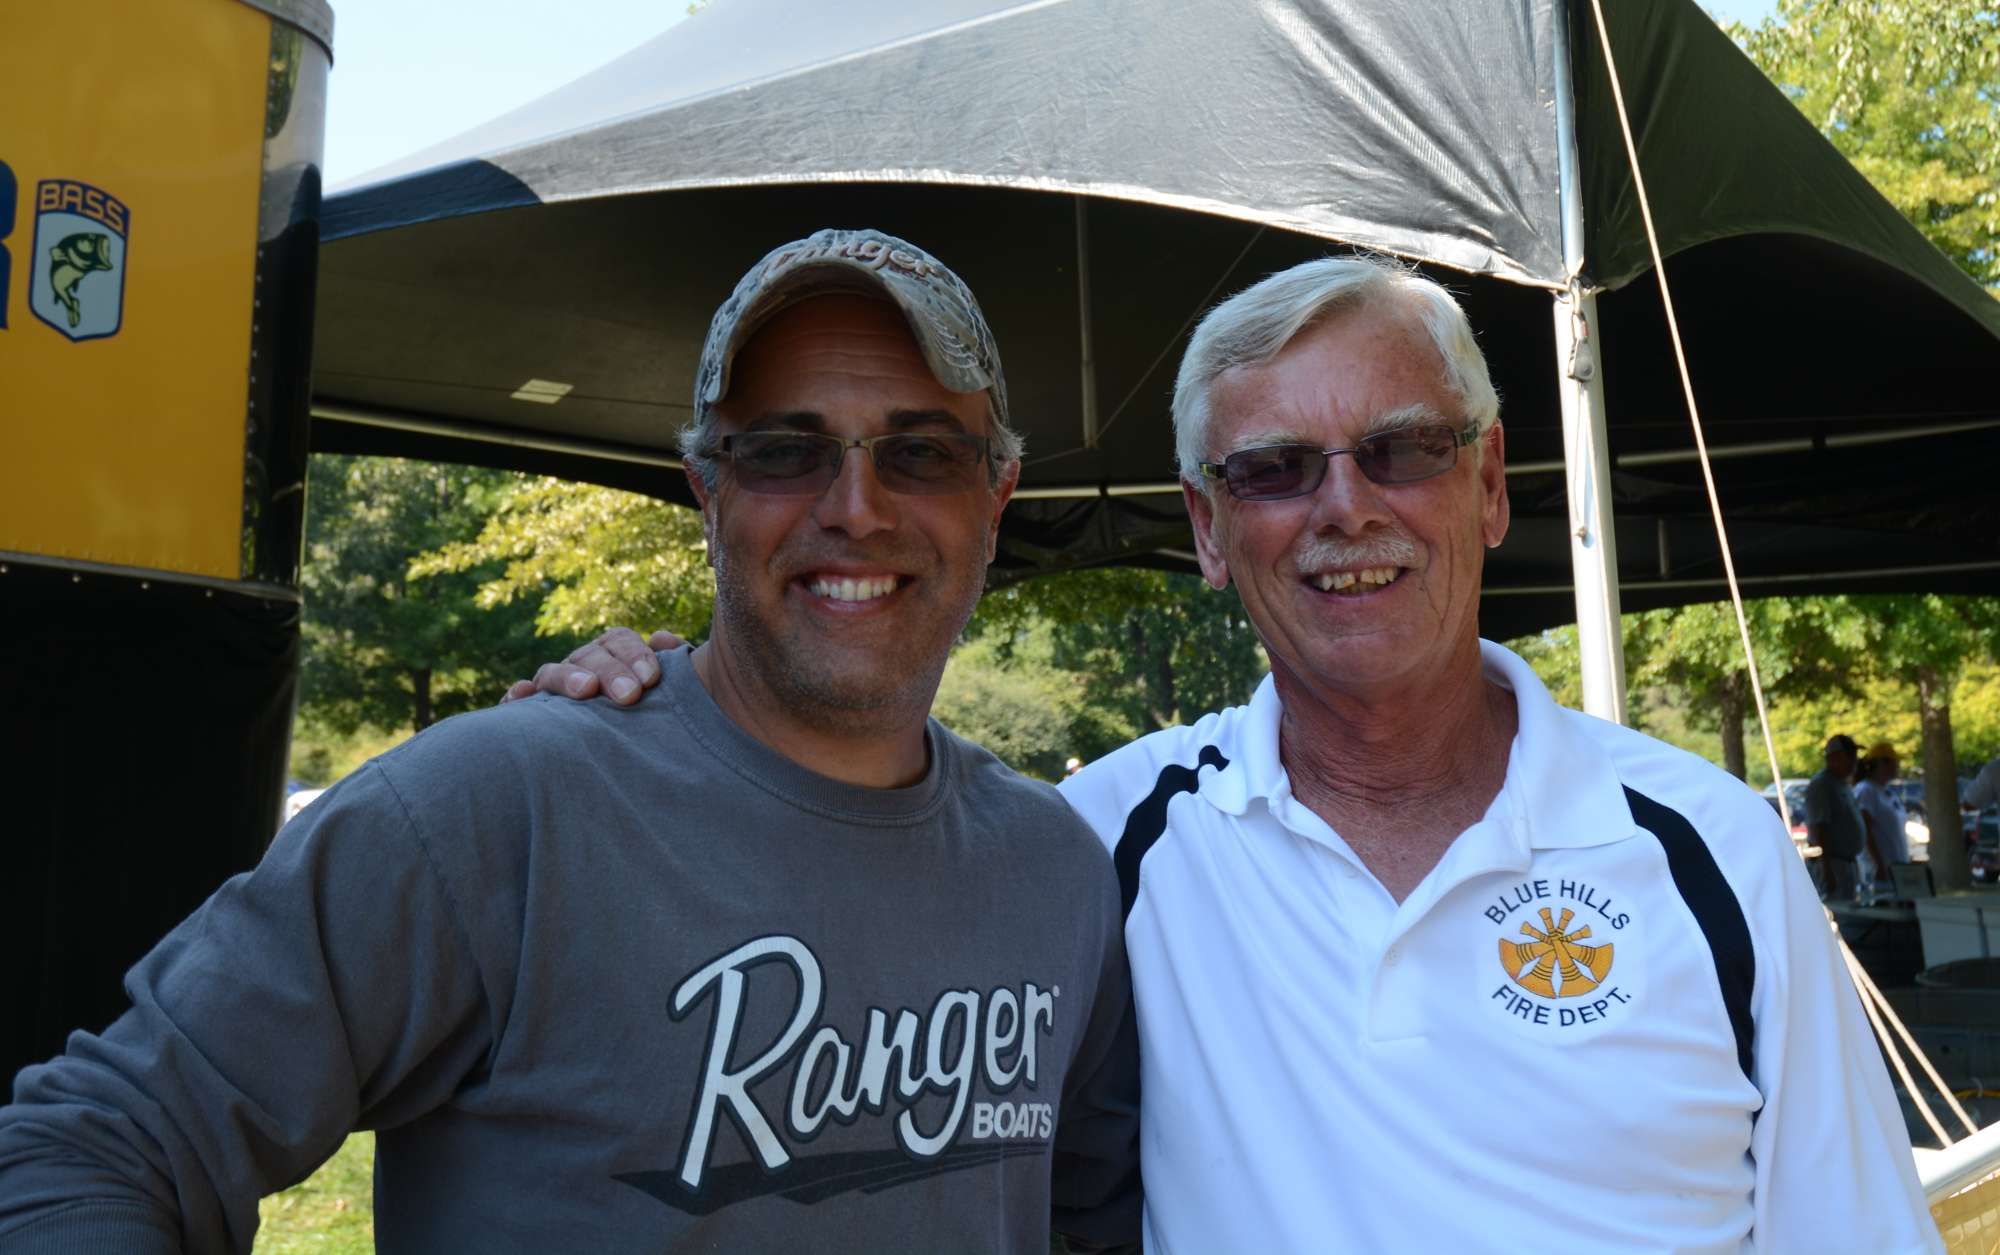 Frank Giner and Roy Rickis go way back to when they were friends with the late Bryan Kerchal.